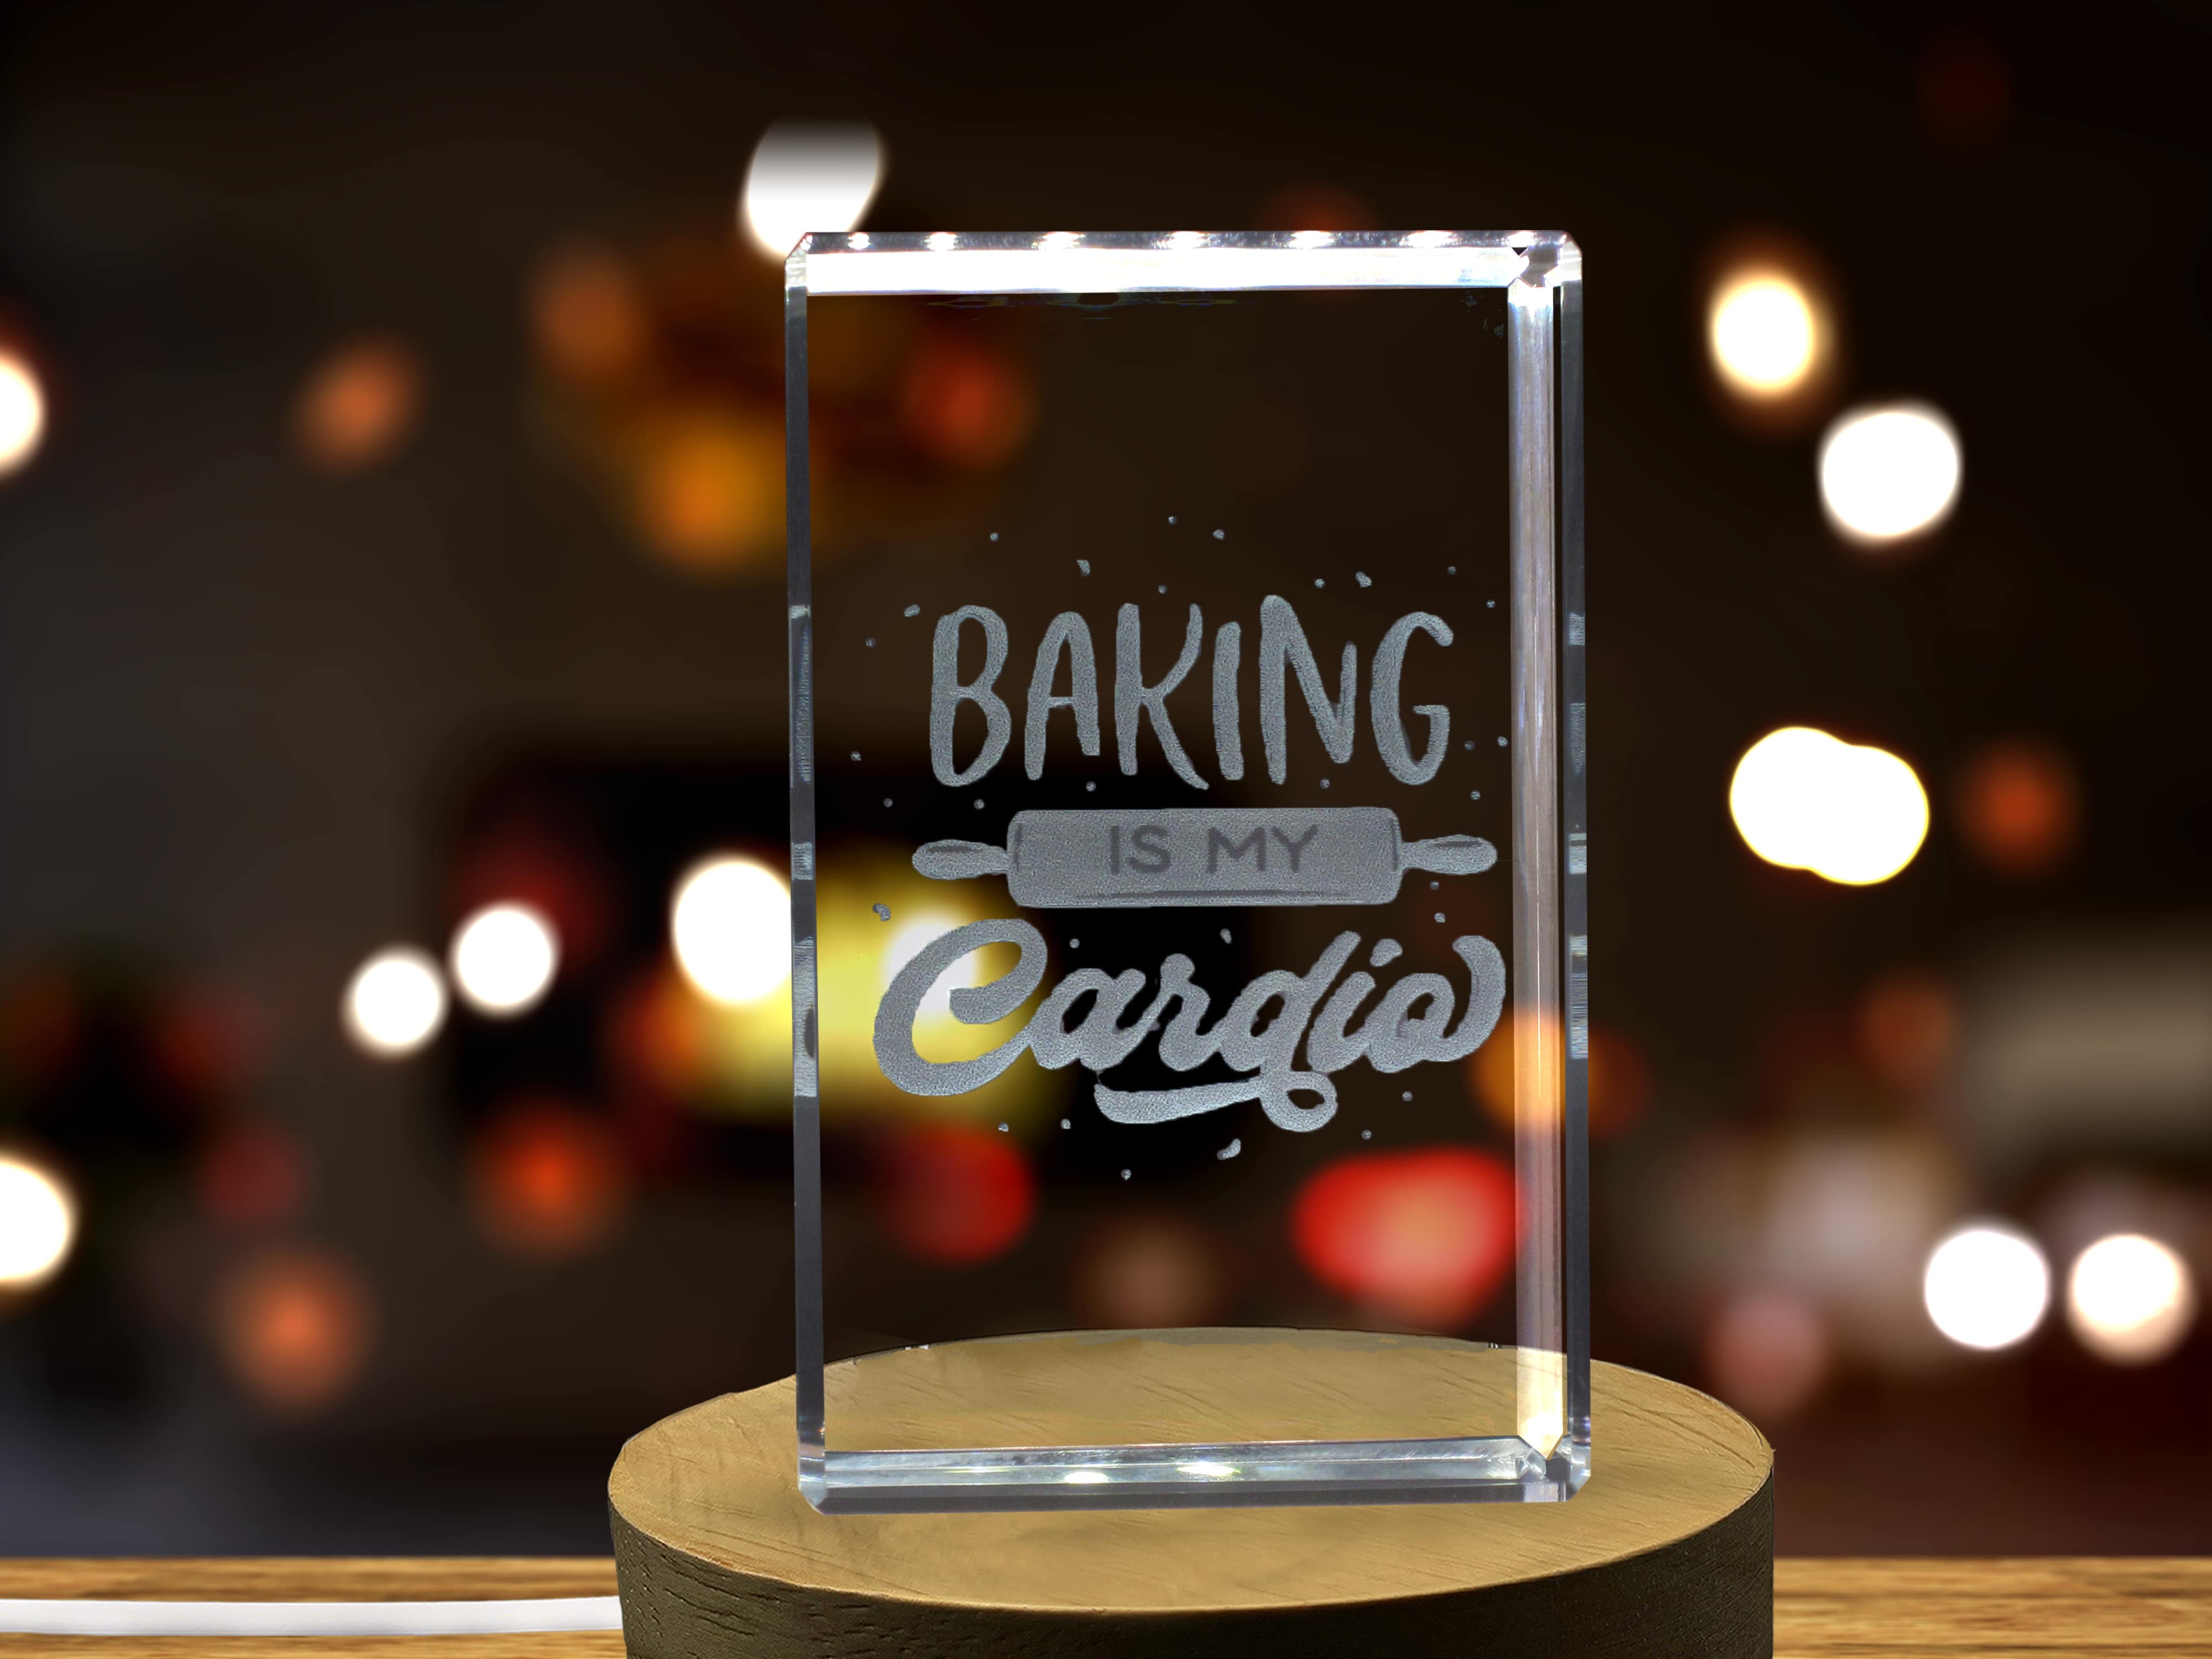 Baking is My Cardio 3D Engraved Crystal 3D Engraved Crystal Keepsake/Gift/Decor/Collectible/Souvenir A&B Crystal Collection